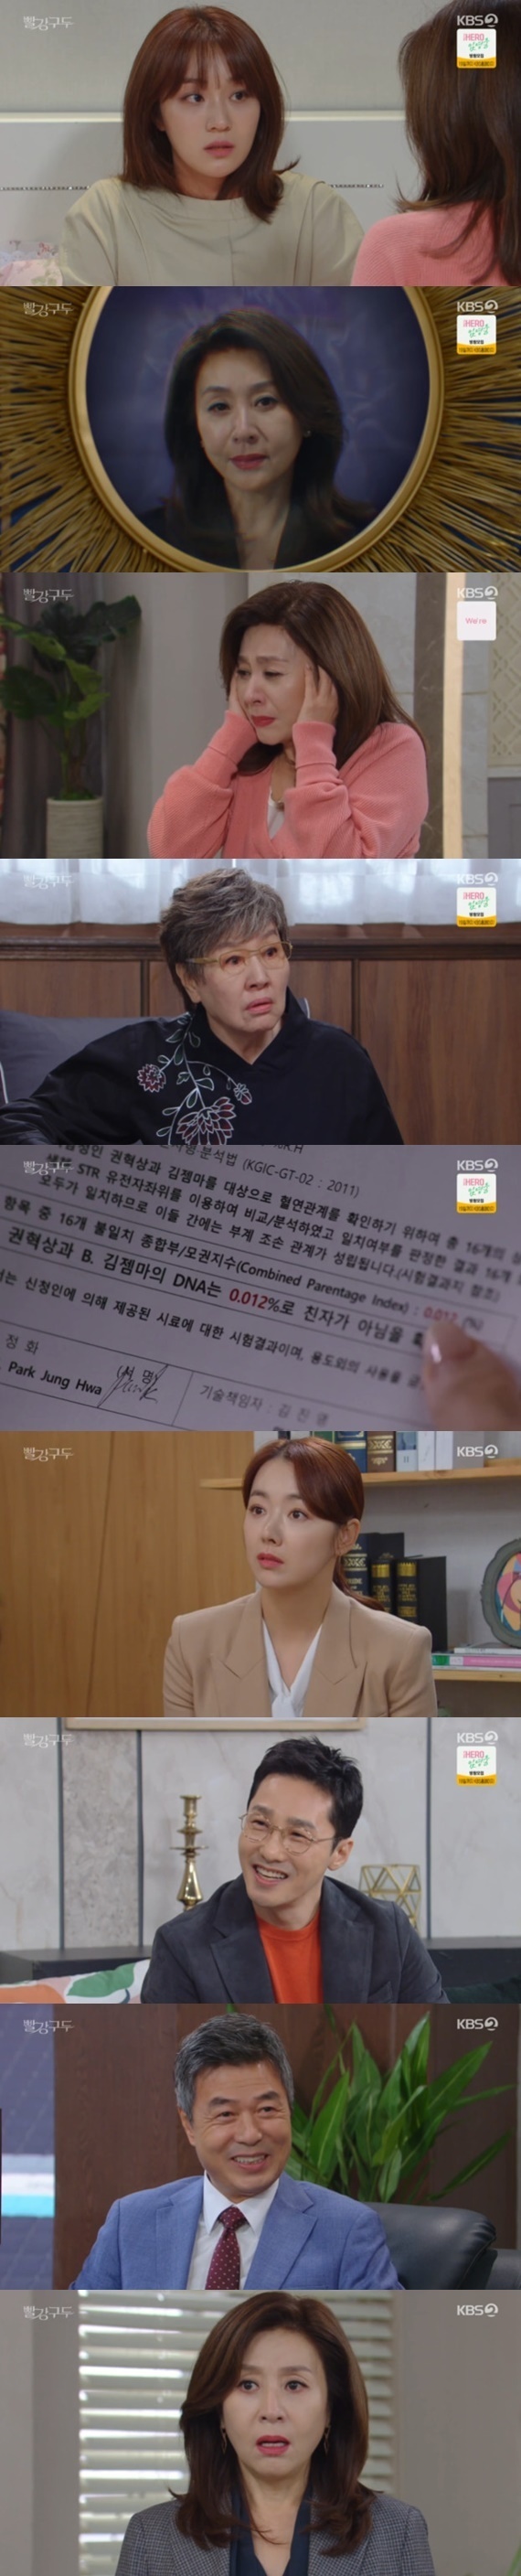 Seoul = = Red Guddu Choi Myeong-Gil was confused by a mistake in commissioning a gene prosecutor for So Yi-hyun, Sunwoo Jae-duk.In KBS 2TV daily drama Red Guddu (played by Hwang Soon-young/directed by Park Ki-hyun), which was broadcast at 7:50 p.m. on the 18th, Kang Min-hee (Choi Myeong-Gil) is confused by the results of paternity test by Kim Gemma (So Yi-hyun) and kwon hyeok-sang (Sunwoo Jae-duk) It contains the image of Mil.Kwon Hye-bin (Jeong Yoo-min) still did not forget Yoon Hyun-seok (Shin Jung-yoon), and blamed the whole thing for Kang Min-hee (Choi Myeong-Gil).In addition, Lee Hye-bin harassed them by mentioning what Kang Min-hee and kwon hyeok-sang did to Kim Gemma (So Yi-hyun) and Kim Jung-guk (Kim Kyu-cheol).Choi Sook-ja (Ban Hyo-jung) contacted Sir Kang Min-hee to congratulate Laura on her success in the new product Guddu and pressure her to rush Kim Gemma out.Kang Min-hee, who promised to take care of it soon, was confused by the test results that kwon hyeok-sang and Kim Gemma were not paternal, saying, Why is it uneasy when it is not clear?Kwon Ju-hyung (brass wine) told Yoon Ki-seok (Park Yoon-jae) that he would love my Kim Gemma from now on.Kwon Ju-hyung asked Yoon Ki-seok and Kim Gemma for consent, saying that Kim Gemma is not to be kicked out.In addition, Kwon Ju-hyung asked Kim Gemma to be a lover between us, not positive or negative.Kwon Ju-hyung told Kang Min-hee that he decided to meet Kim Gemma on the premise of marriage.On the other hand, kwon hyeok-sang, who was worried between Kang Min-hee and Kwon Ju-hyung, provoked Kim Gemma by asking Kim Gemma for his natural goodwill, and Kim Gemma provoked him by mentioning his relationship with Kwon Ju-hyung, saying that there is evidence that kwon hyeok-sang tried to kill him.Kwon Joo-hyung, Kim Gemma, Kang Min-hee, kwon hyeok-sang, was nervous and blamed each other for the news.Kang Min-hee learned that Kim Gemmas toothbrush, which he had asked for a gene test, had changed from Kim So-jin (Dani), who was a prosecutor.Kang Min-hee was very embarrassed and raised tension.KBS 2TV daily drama Red Guddu is a drama depicting the story of a heartless mother who left for love and Blow-Up while ignoring the blood of her own success and her daughter who fell into the bridle of Blow-Up, which can not be stopped by revenge for her. It is broadcast every Monday through Friday at 7:50 pm.